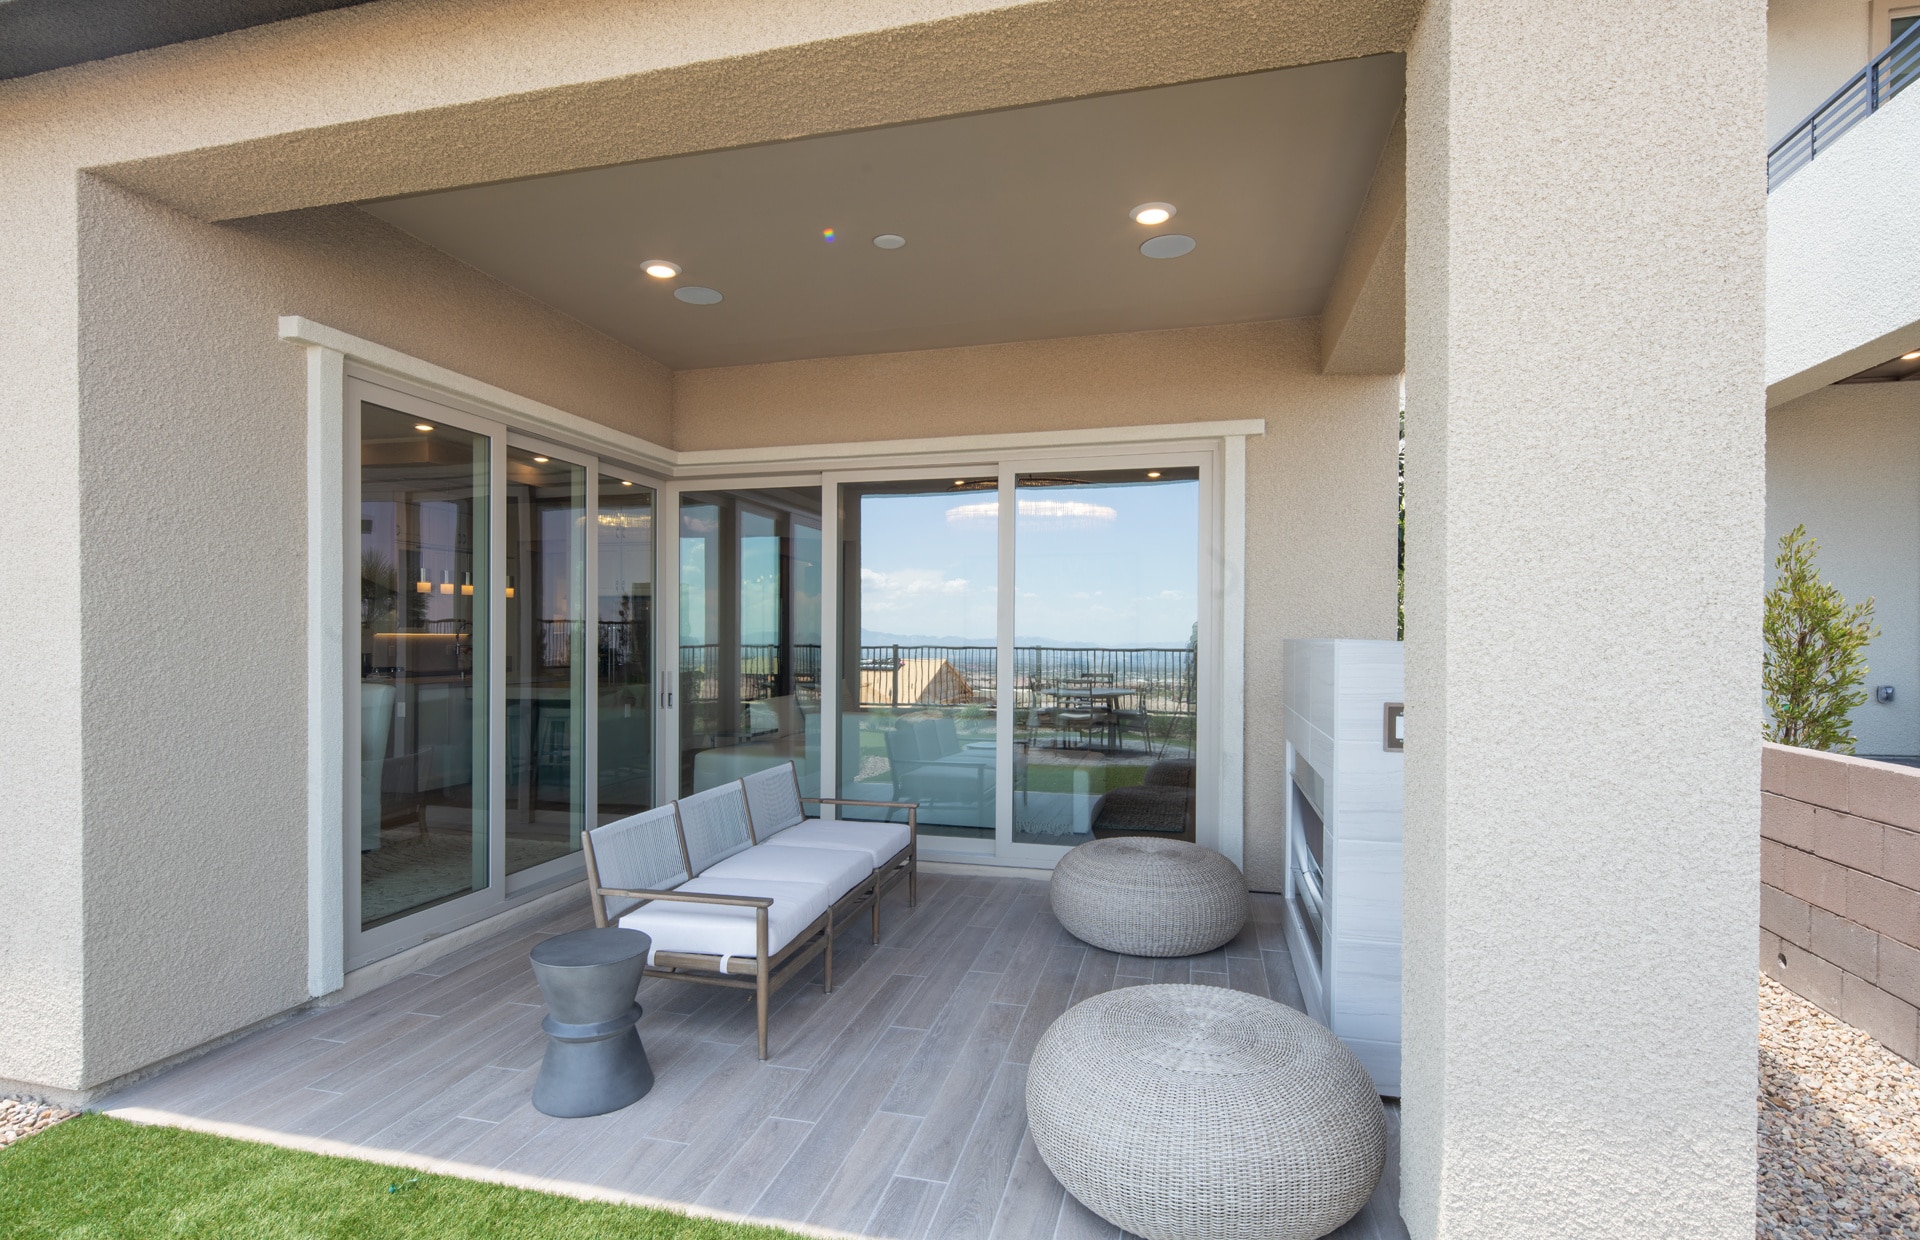 Backyard of Cesena Model at Carmel Cliff by Pulte Homes